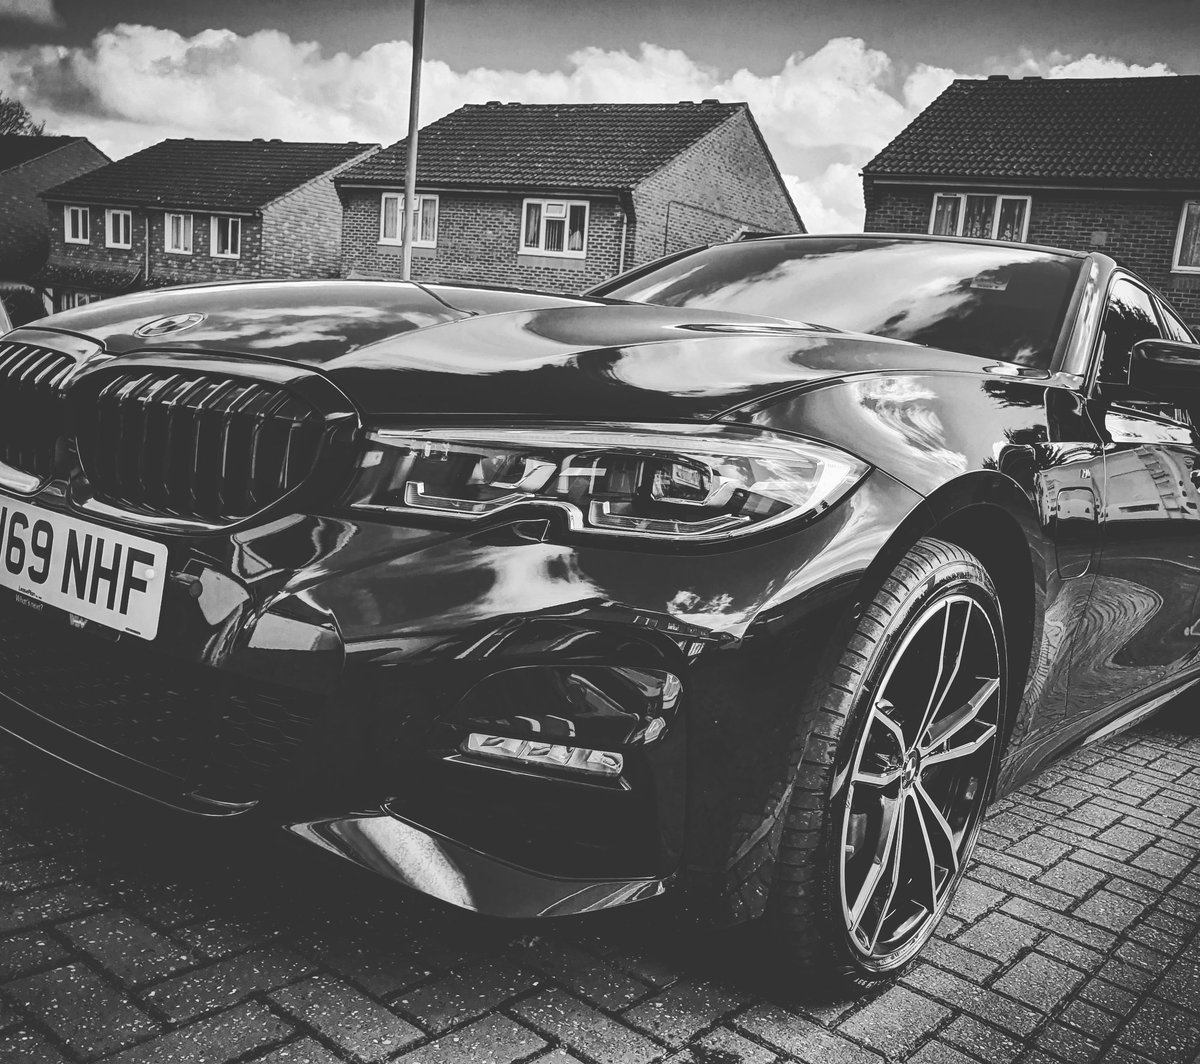 This was my Christmas present! I was sceptical of electric/hybrid cars, but I am in love with this! Would have no concerns going full electric now for my next model! Hopefully there will be more choices on the market in 18 mths! I still want it to look nice! #bmw #msportplus